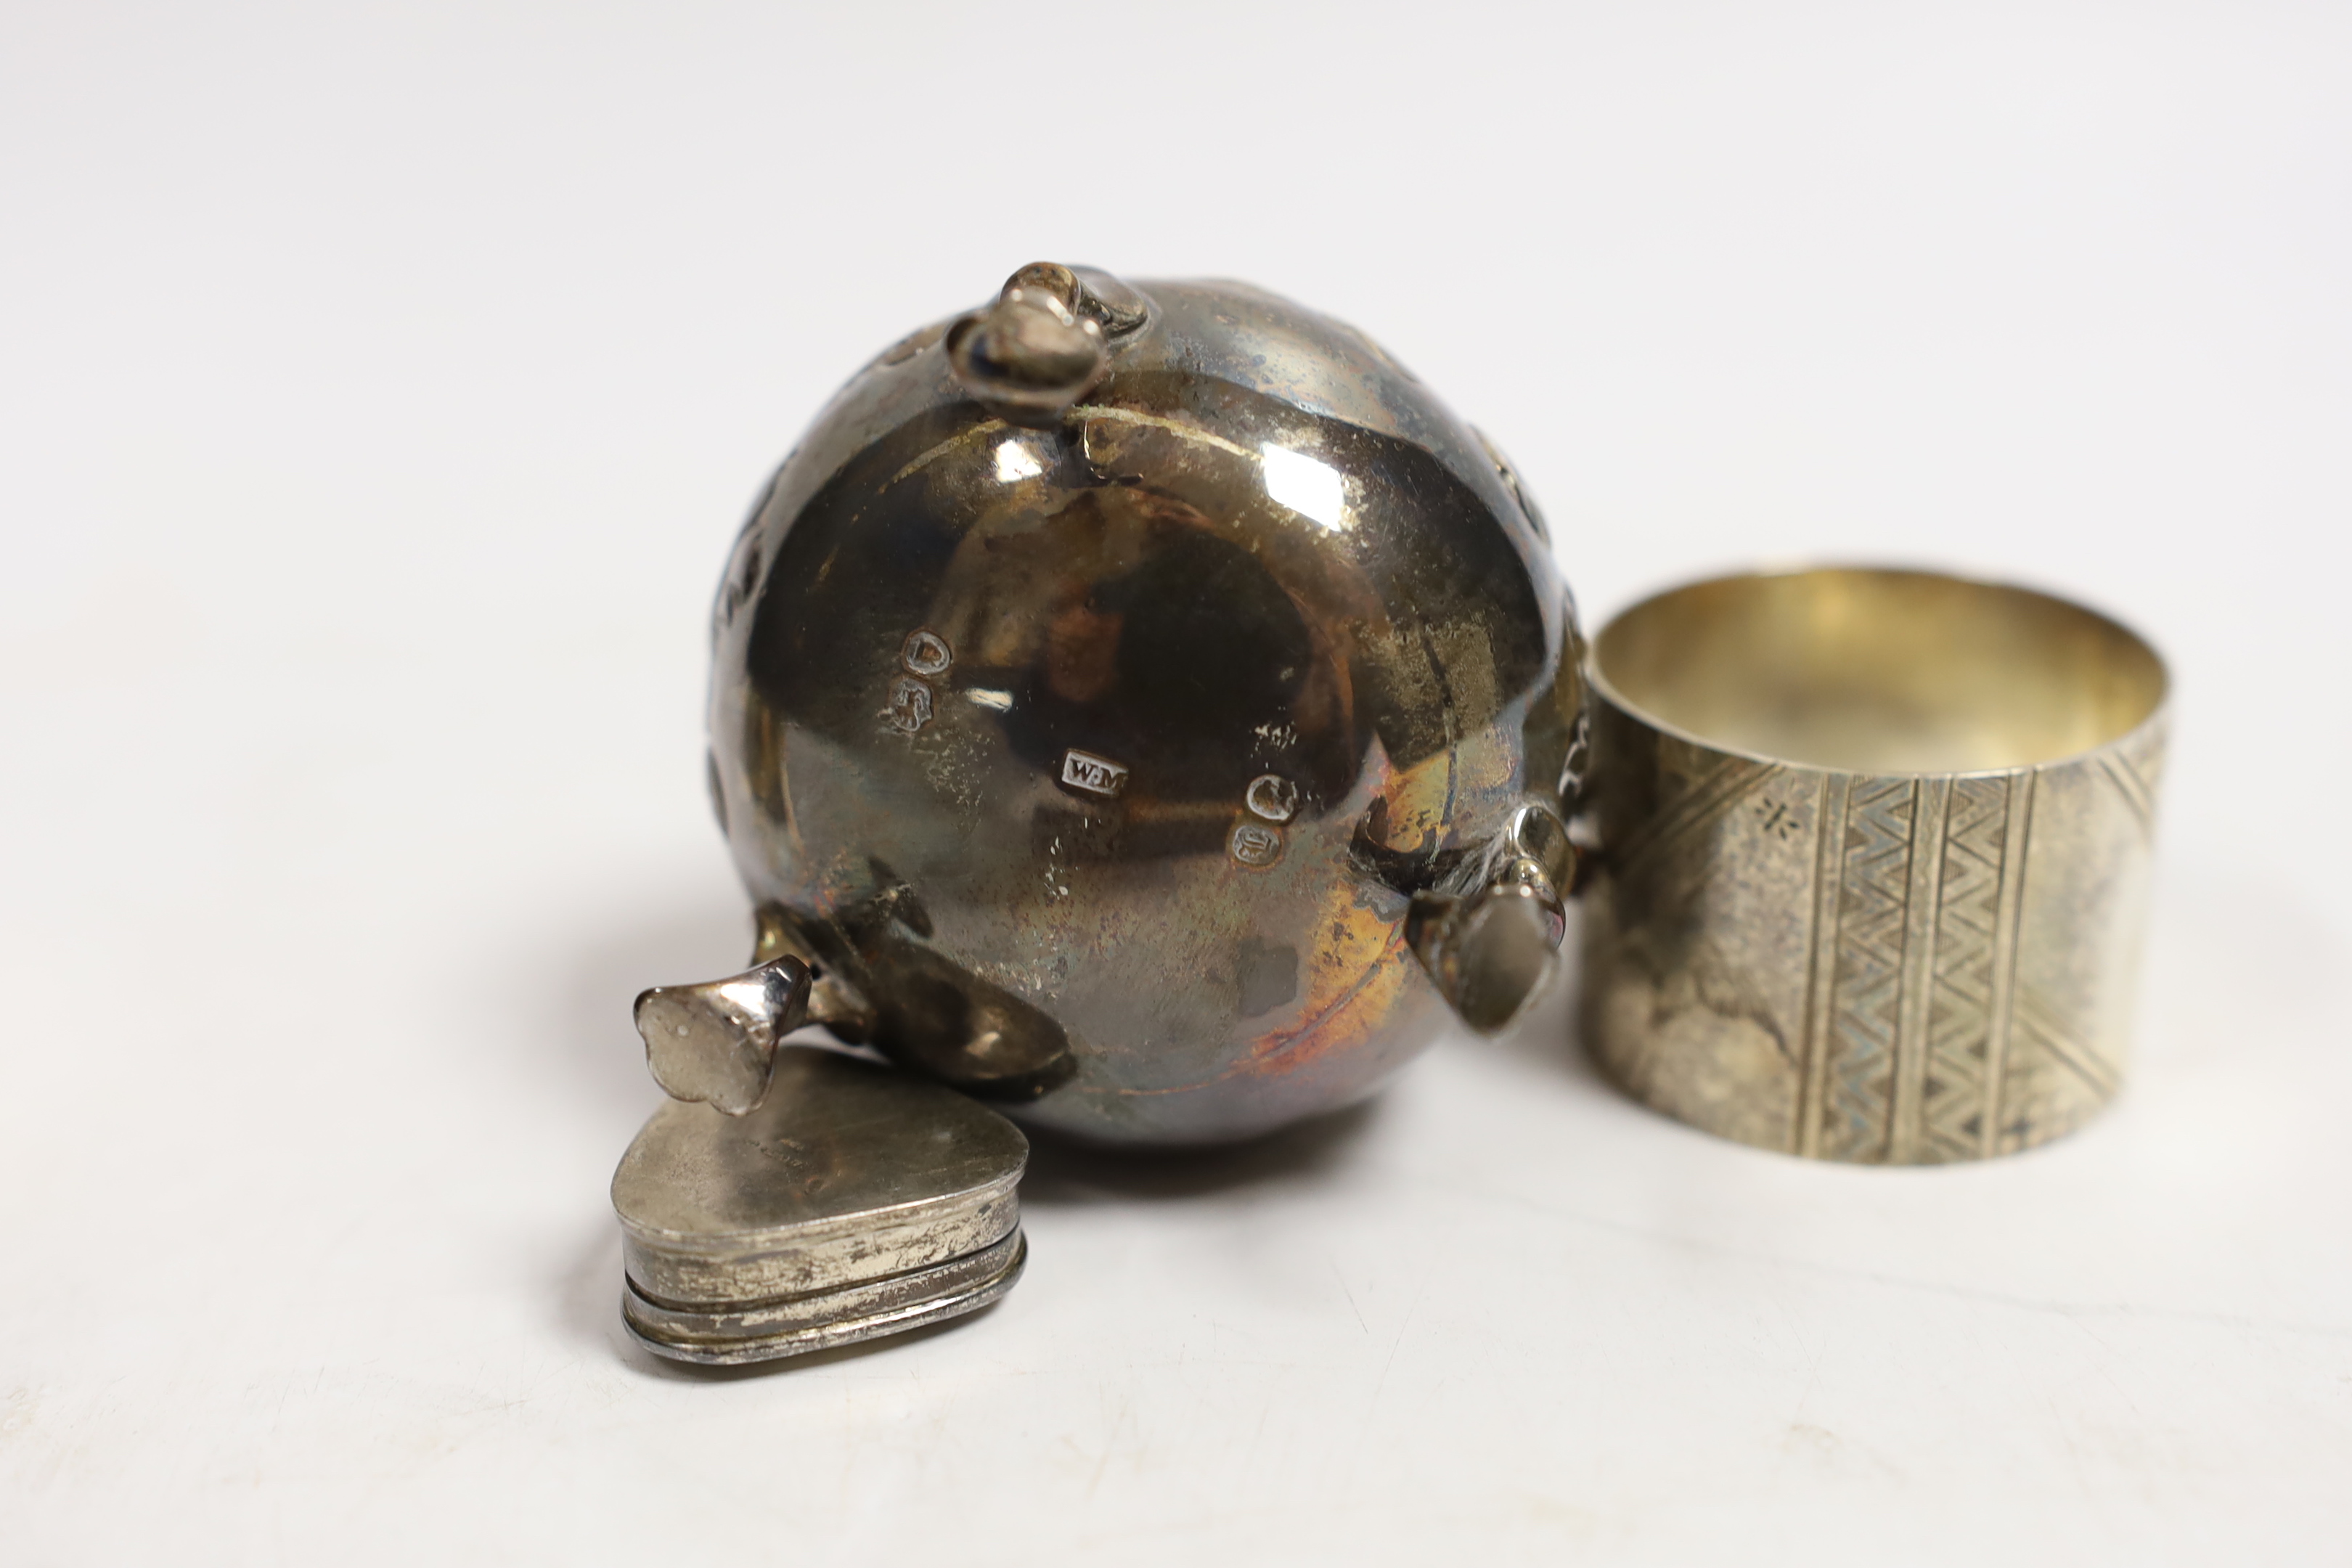 A Victorian silver baluster cream jug, London, 1846, 95mm, a pair of Victorian silver napkin rings engraved with aesthetic decoration, Charles Edwards, London, 1880 and a modern silver pill box.